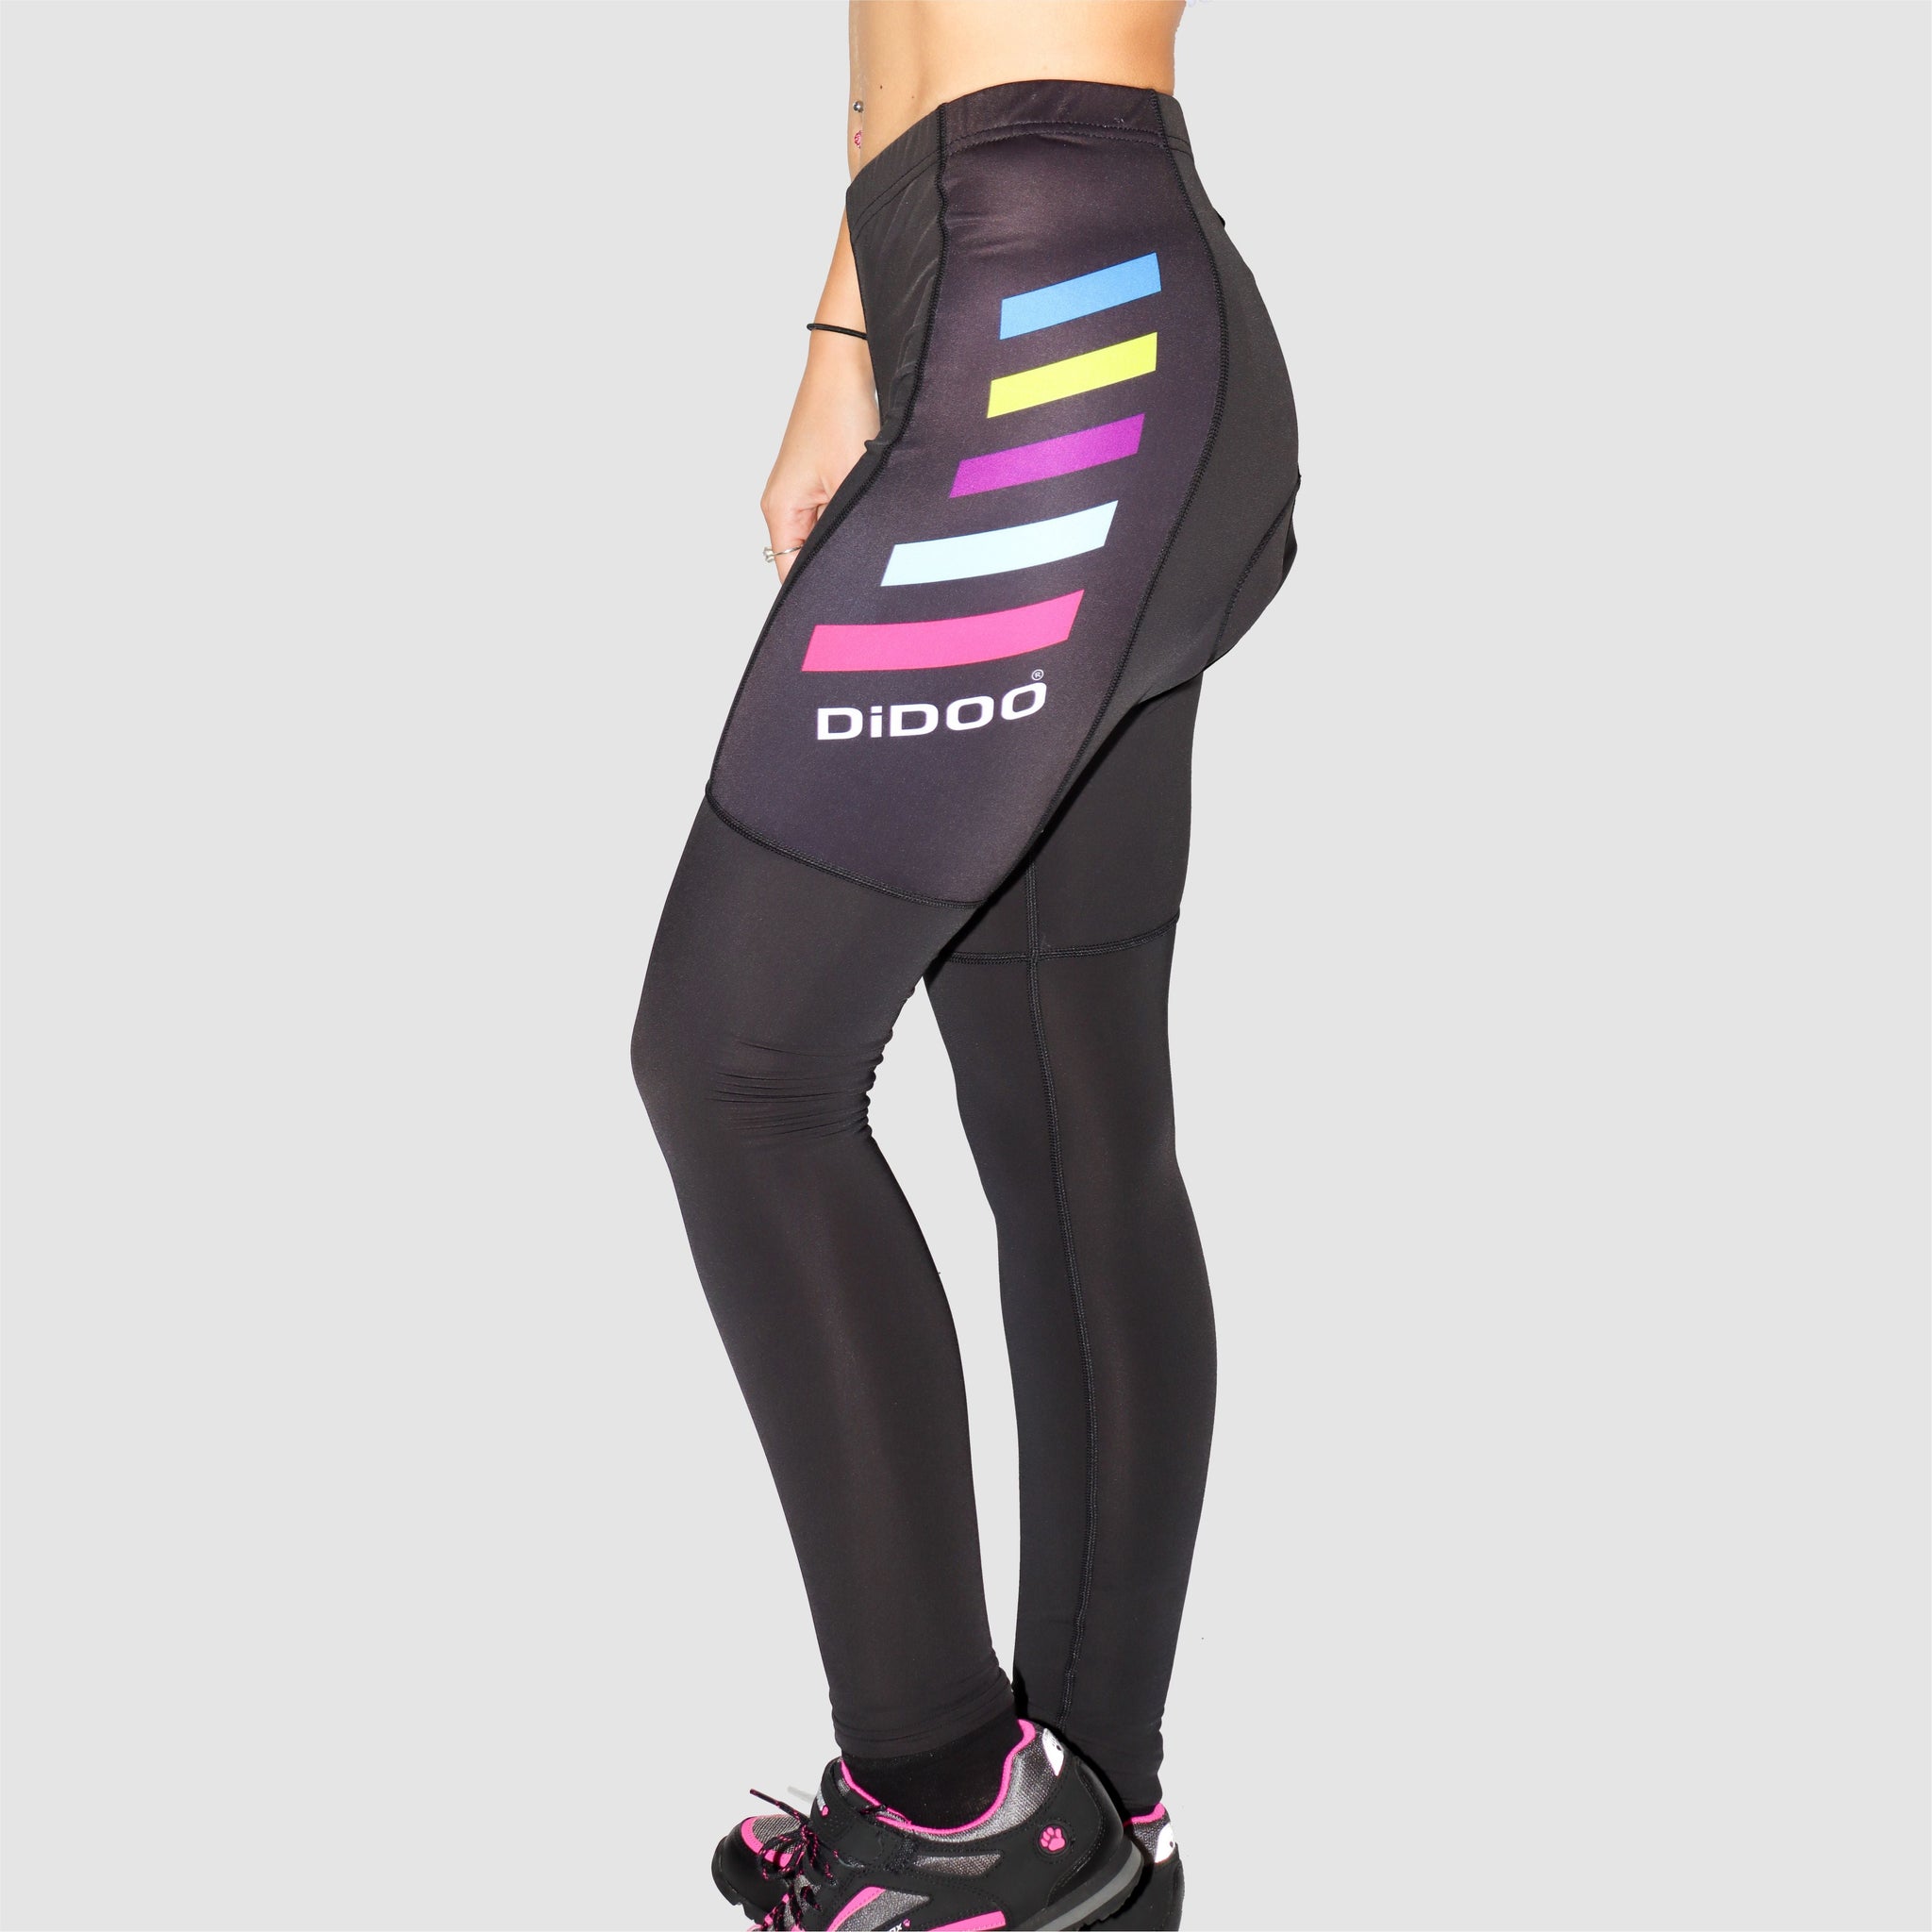 DiDoo Women Pro Padded Winter Cycling Pants Black and Multicolour Strips